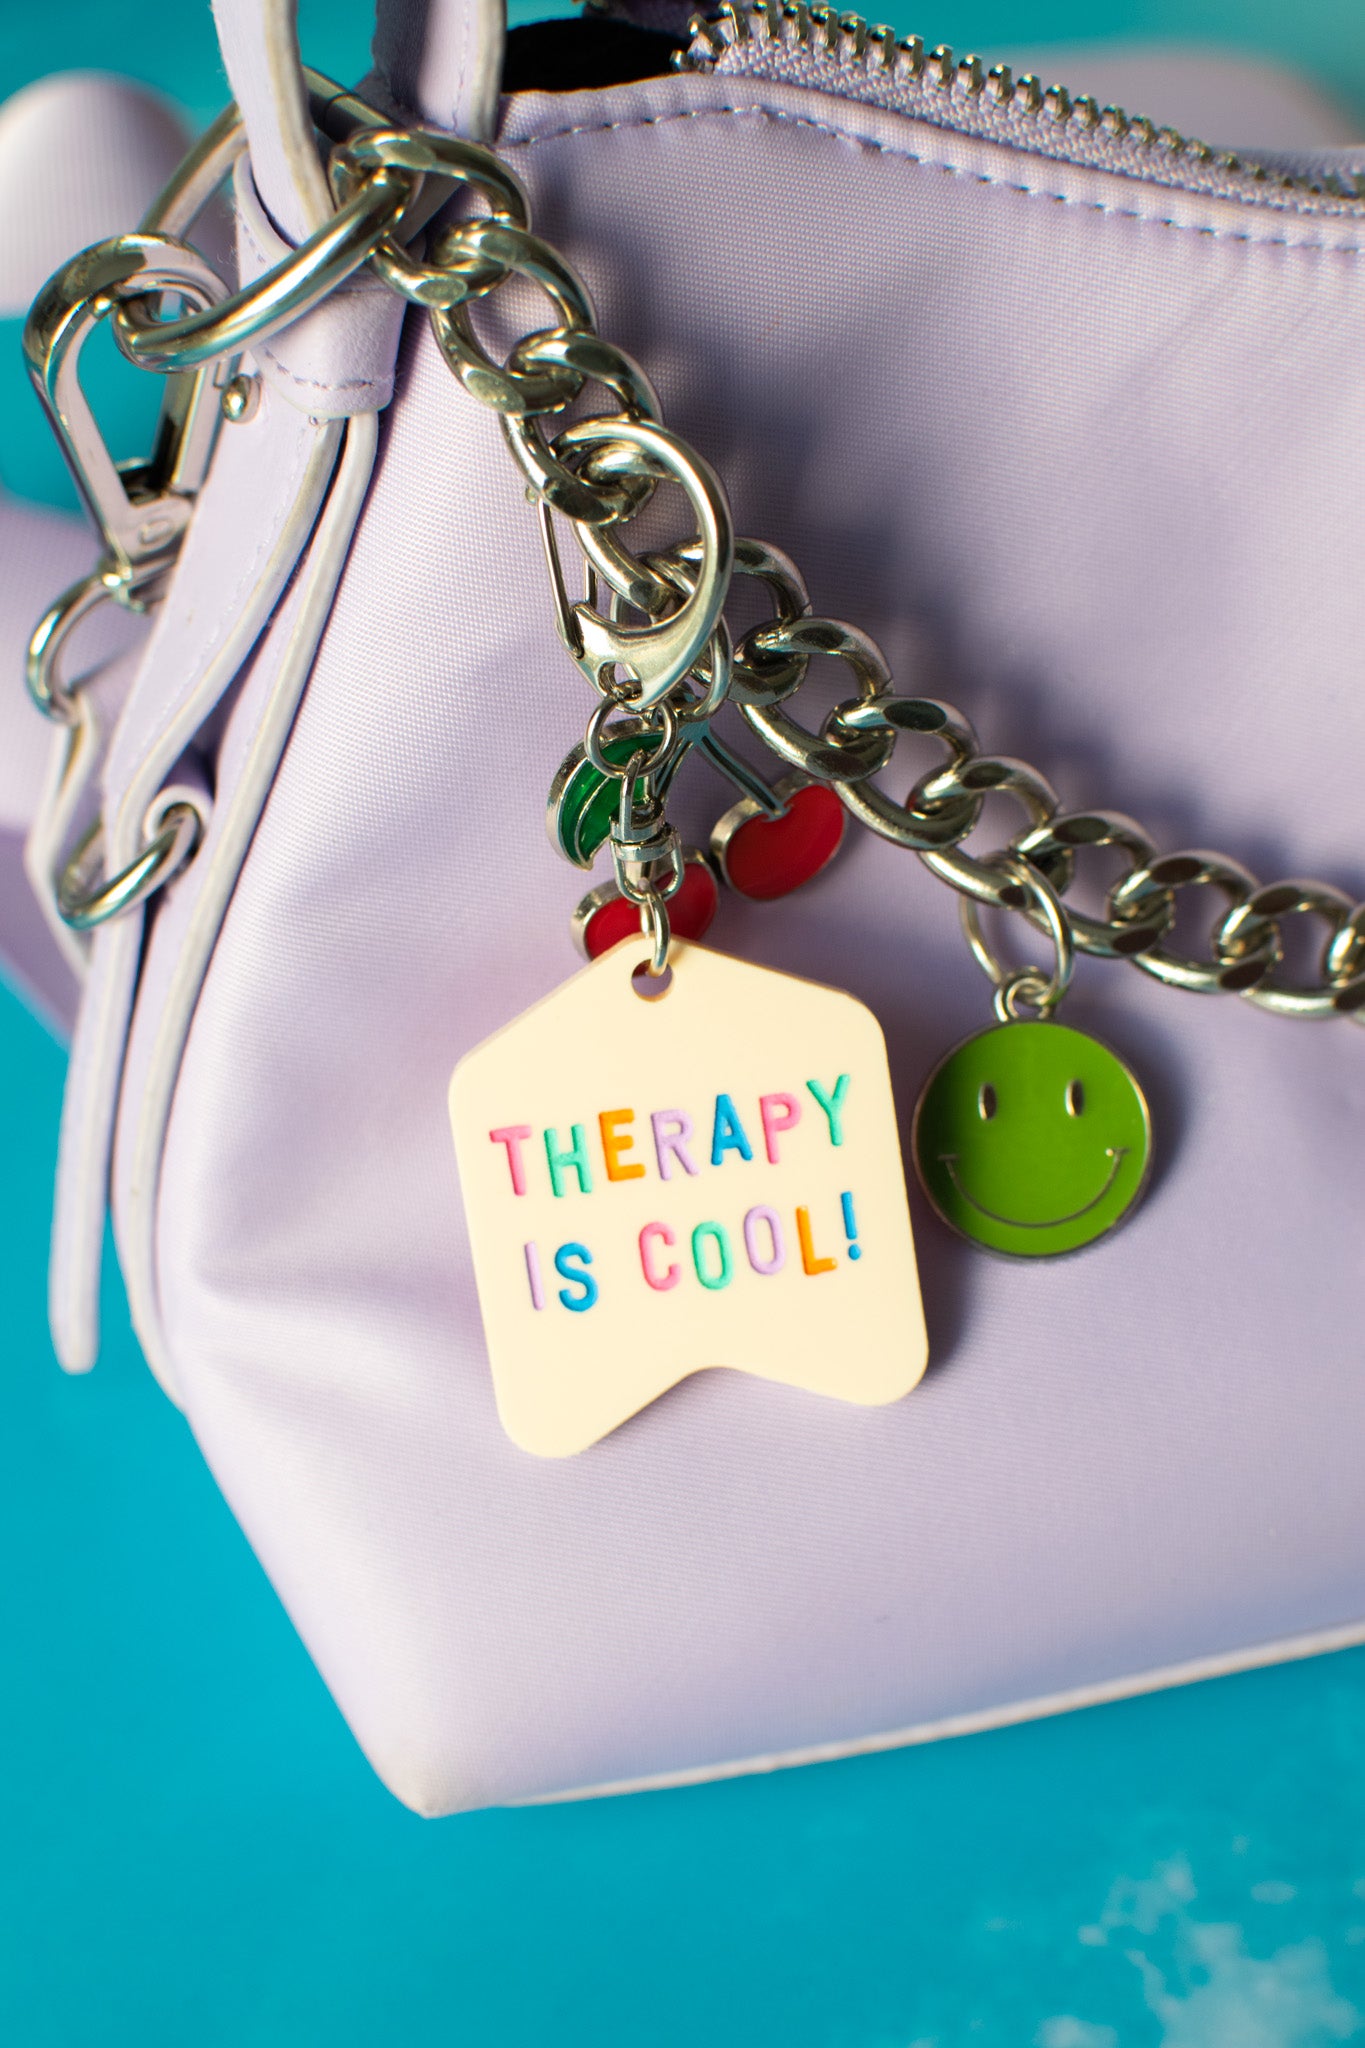 Therapy is cool! keychain